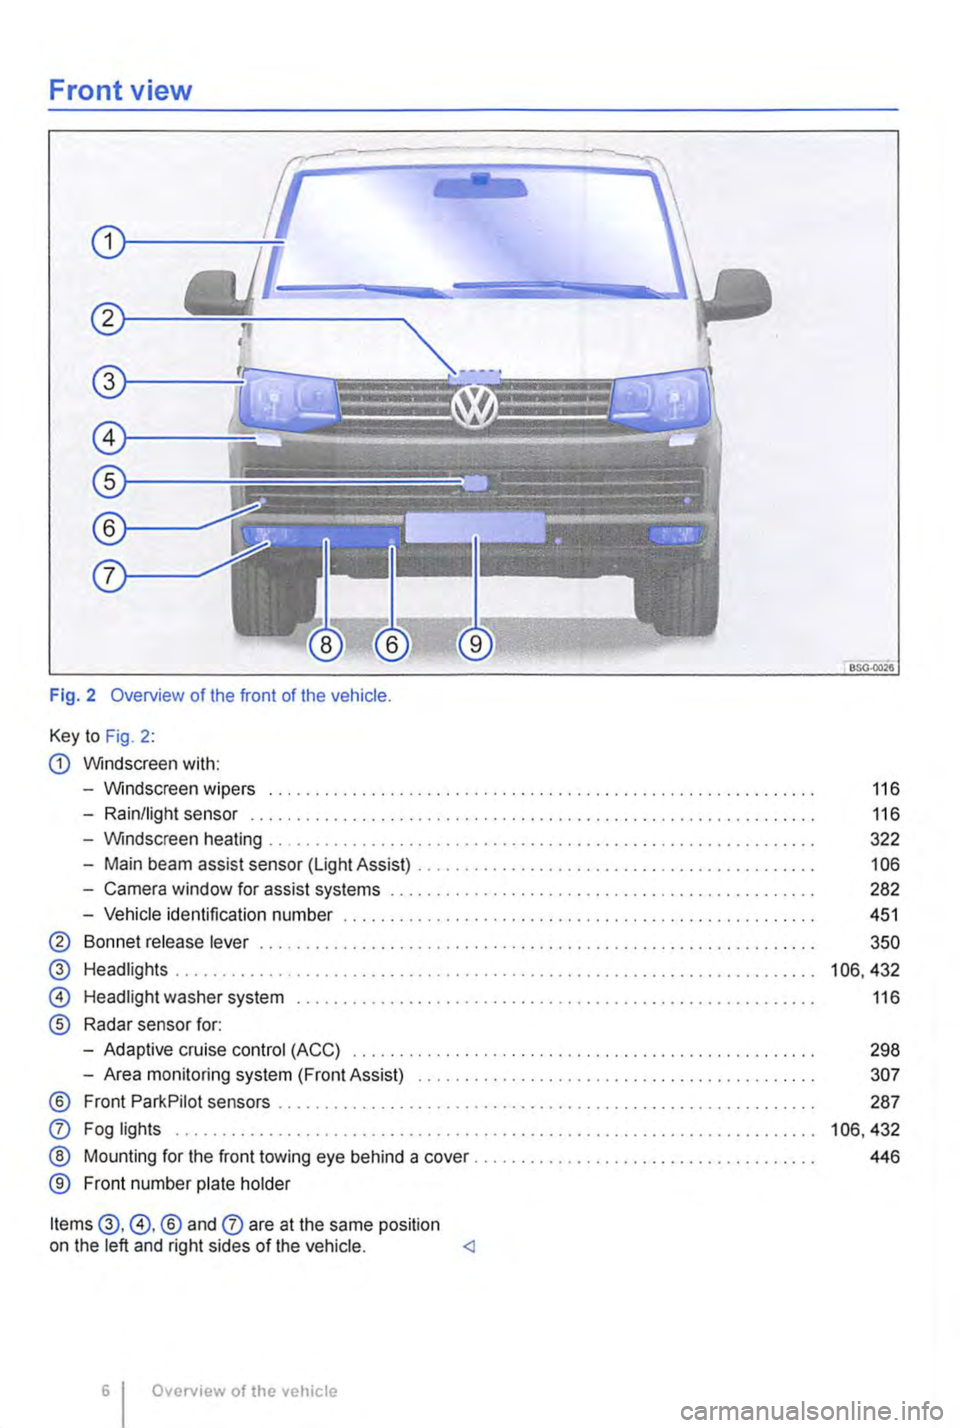 VOLKSWAGEN TRANSPORTER 2016  Owners Manual Front view 
Fig. 2 Overview of the front of the vehicle. 
Key to Fig. 2: 
G) Windscreen with: 
-Windscreen wipers .............. . 
-Rain/light sensor .............. . 
-Windscreen heating 
-Main beam